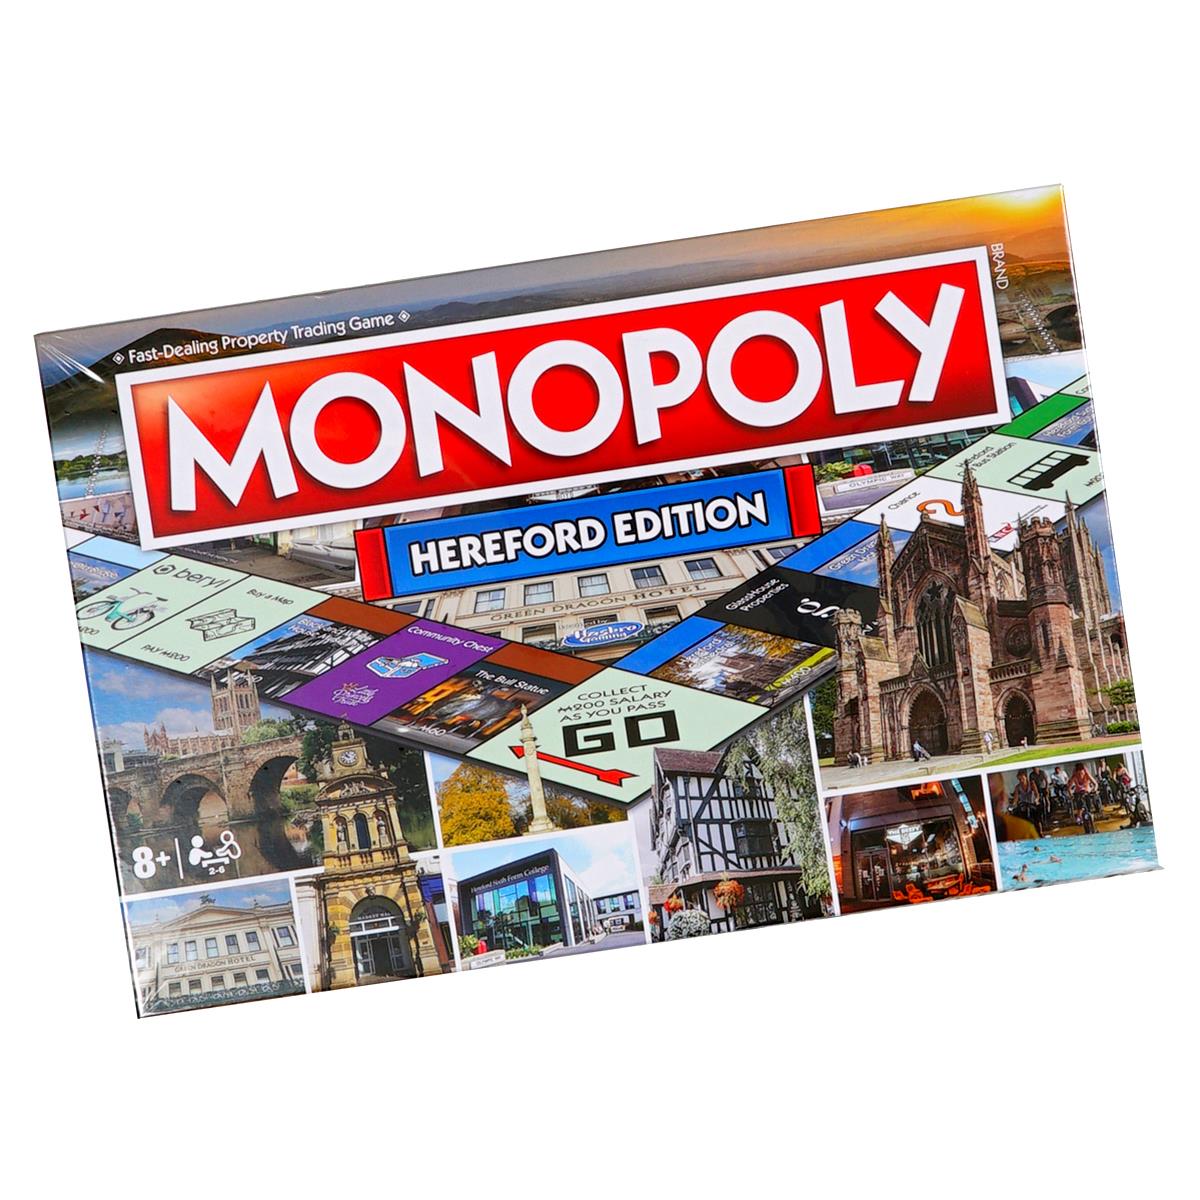 What made Hereford United FC famous in the Hereford Monopoly game?